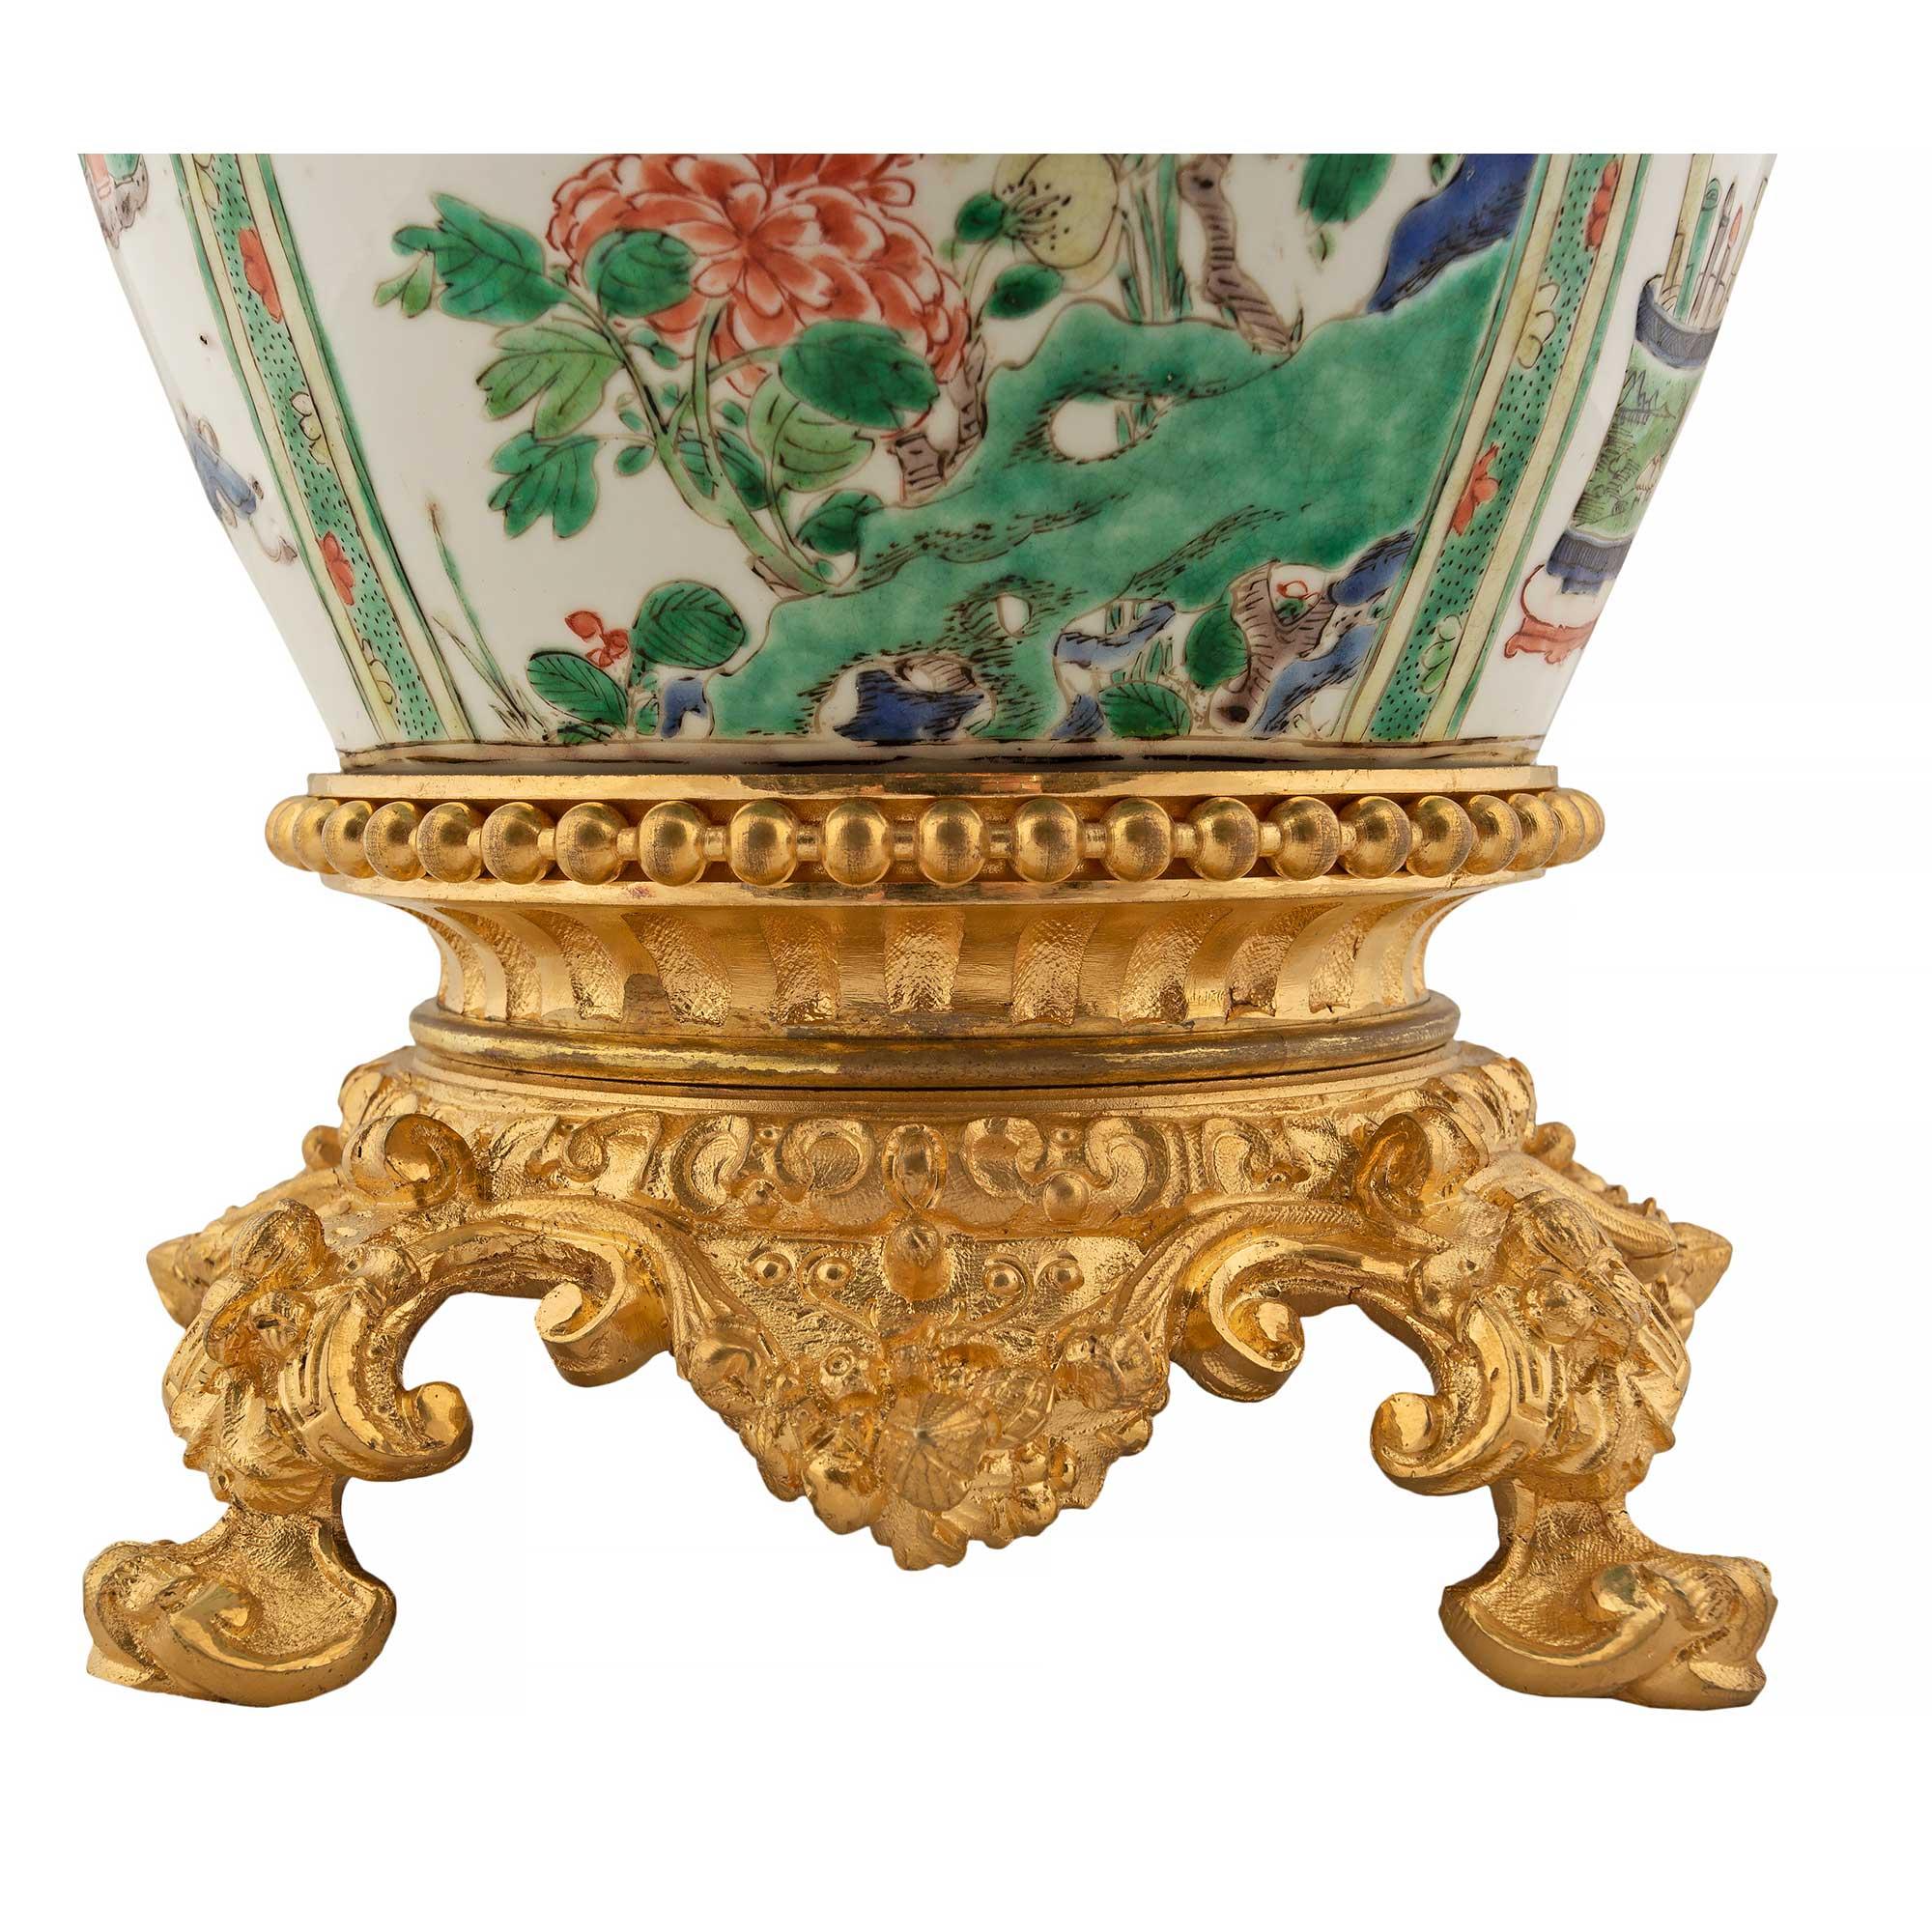 French 19th Century Louis XVI St. Ormolu Mounts on Chinese Export Porcelain Urns For Sale 6